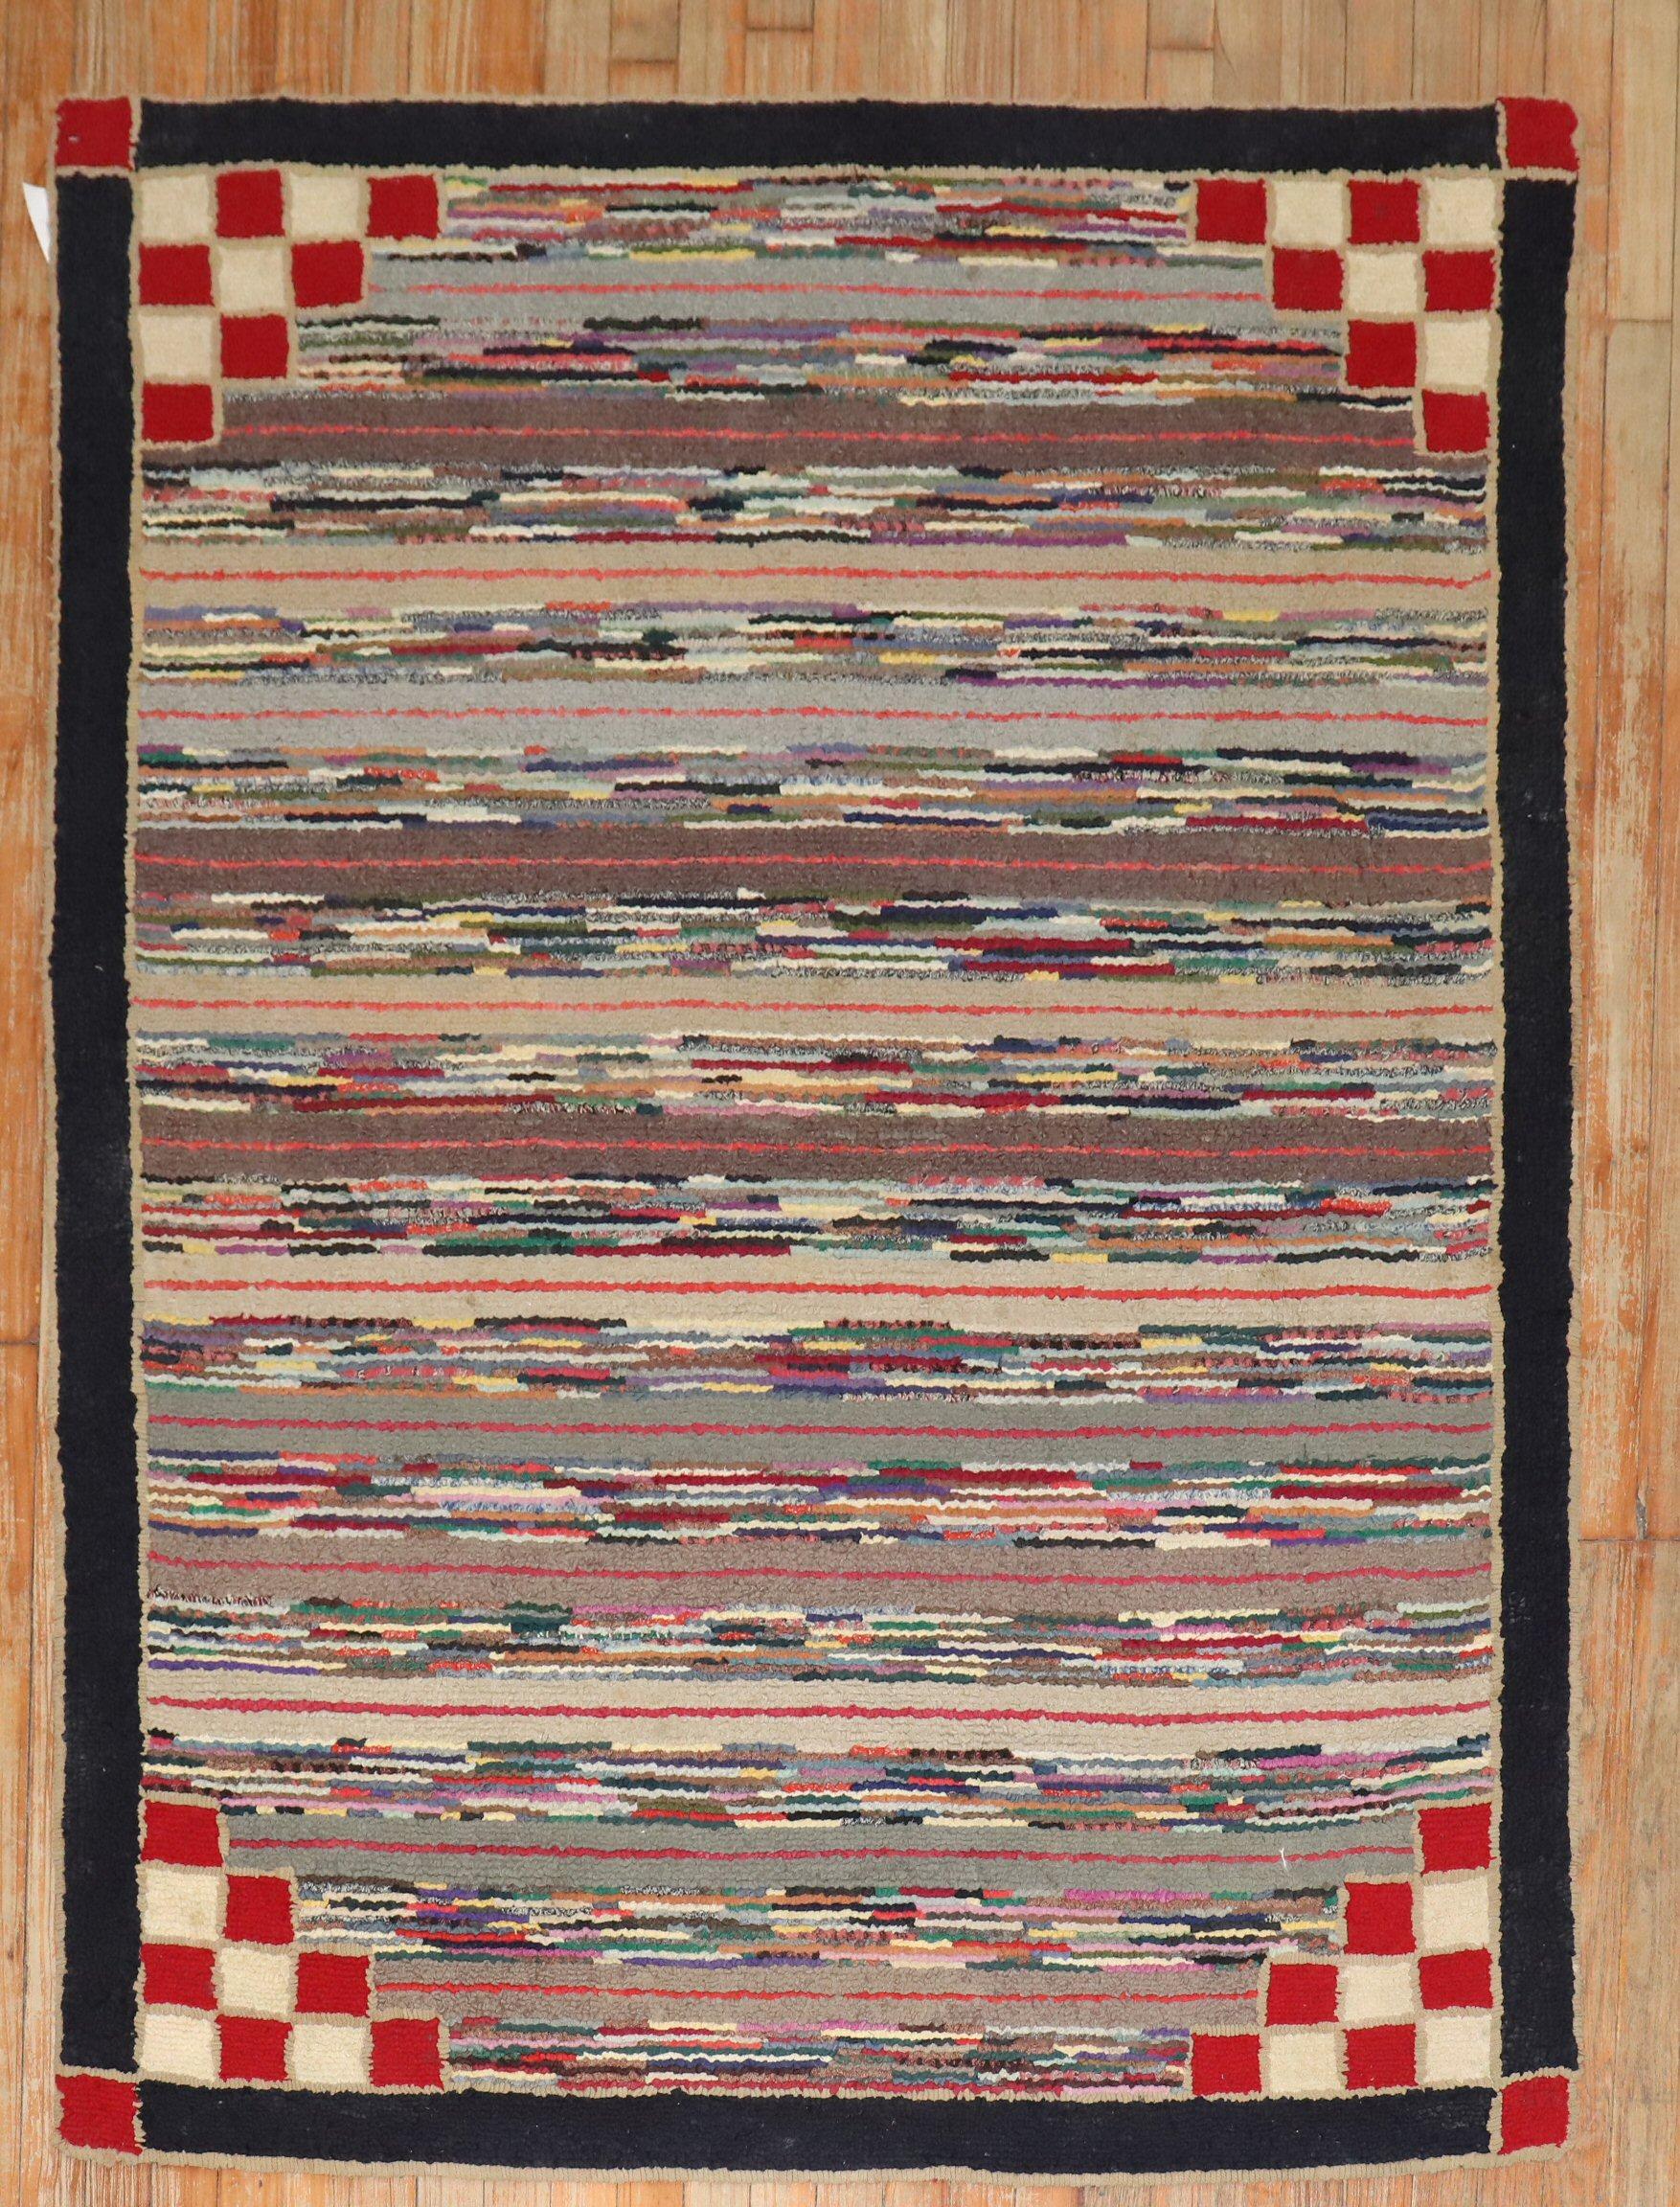 Description
An American hooked accent-size rug from the 2nd quarter of the 20th century

Details
rug no.	j3607
size	4' 4